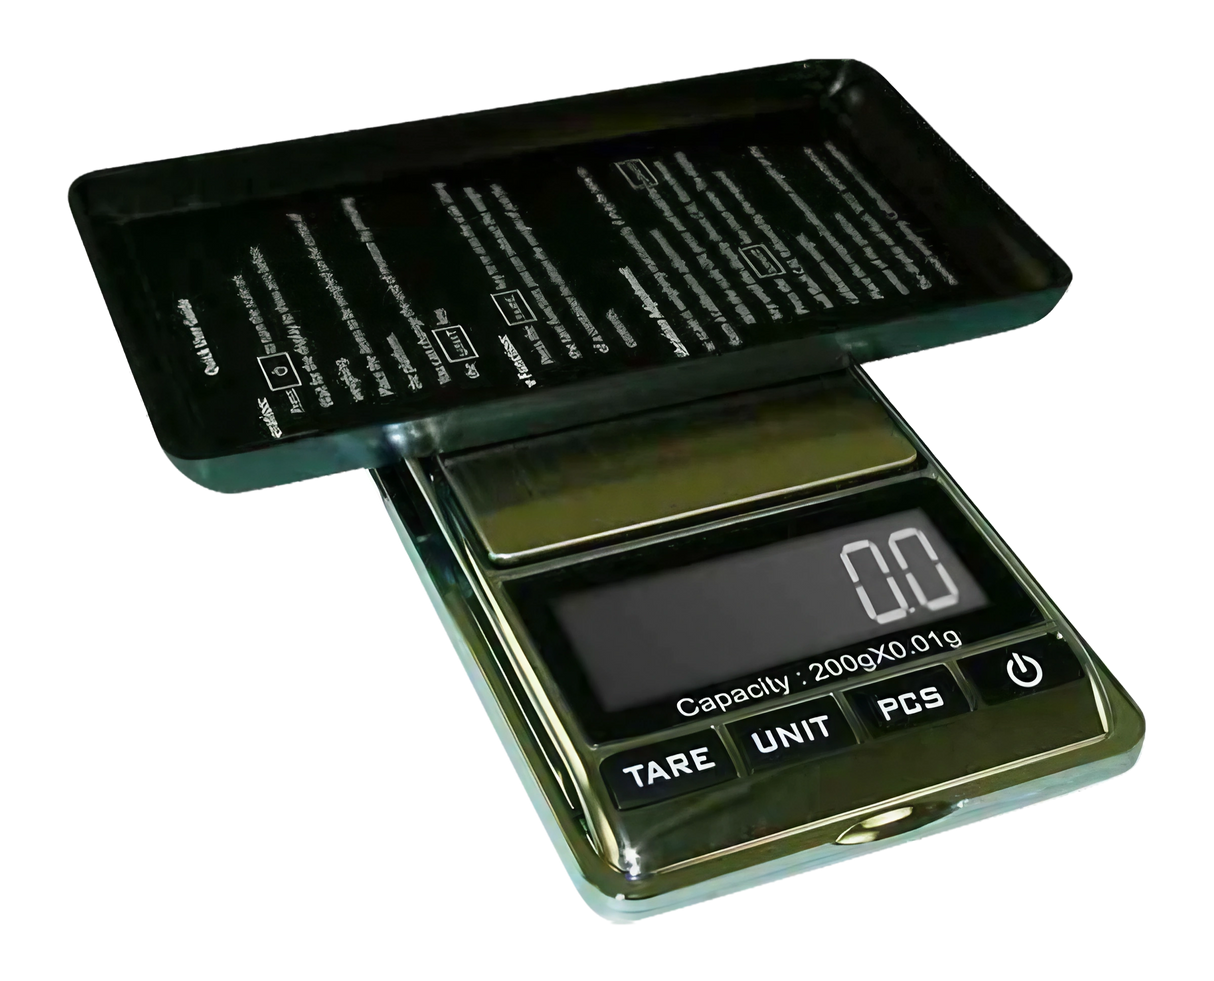 AWS Chrome Digital Scale open view, 200g x 0.01g accuracy, compact and portable design